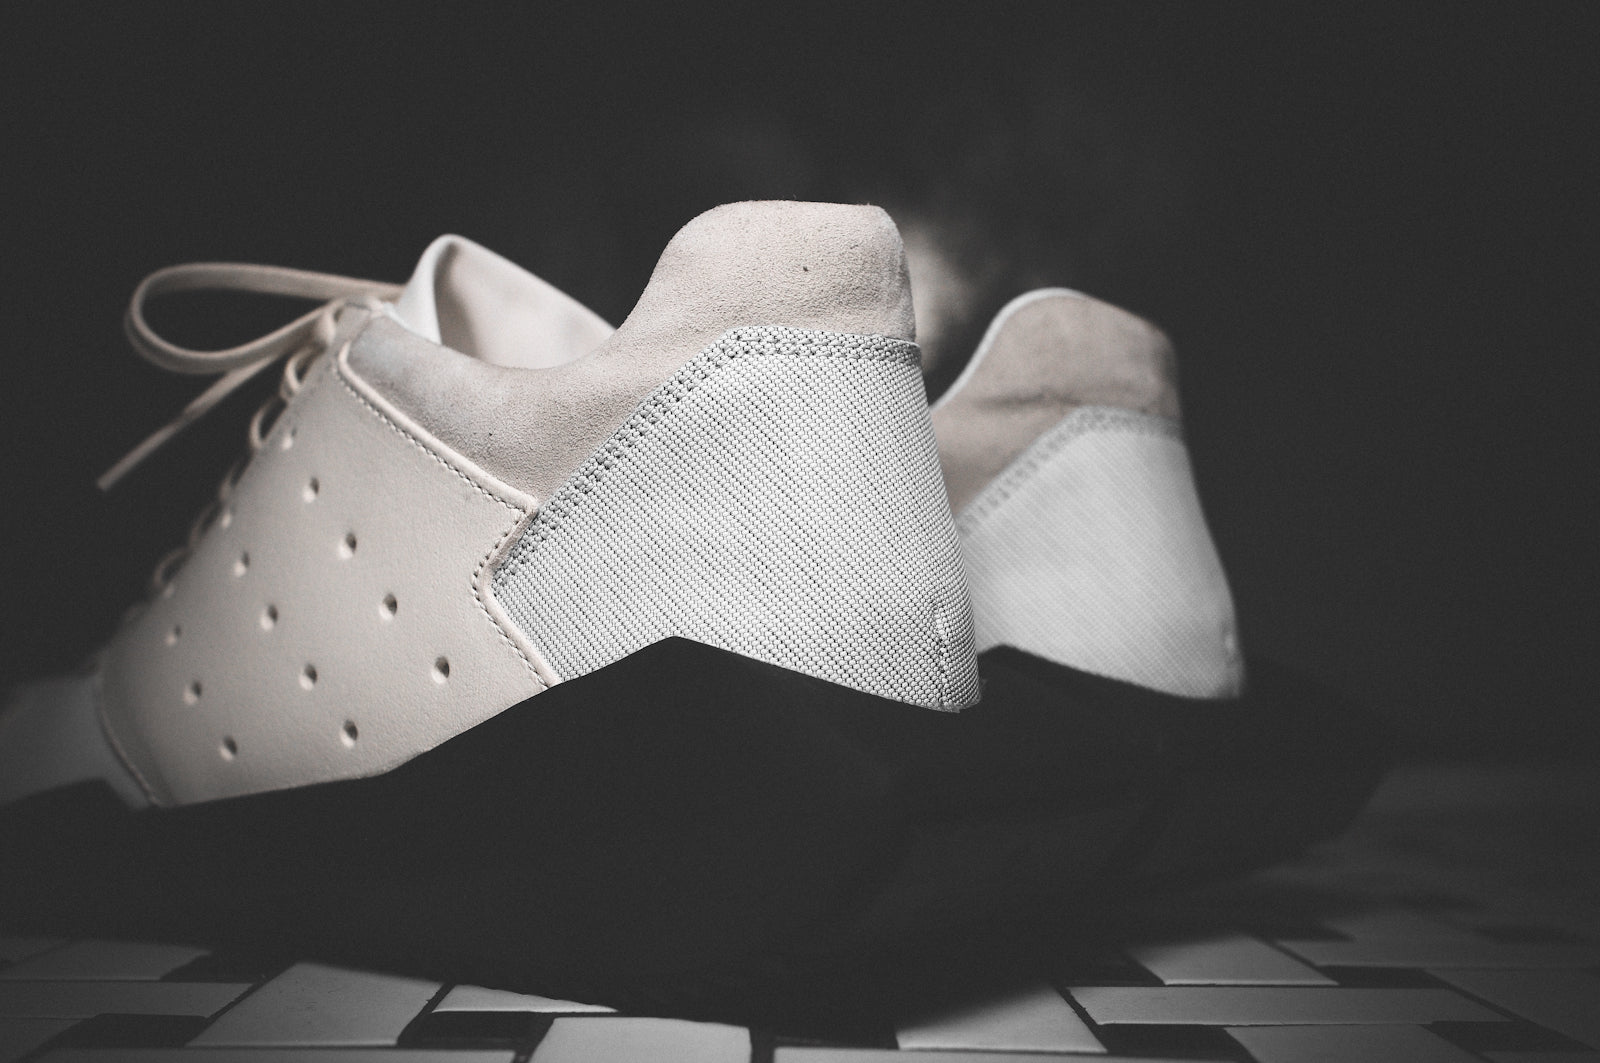 ADIDAS BY RICK OWENS TECH RUNNER FALL/WINTER '14 COLLECTION @ KITH NYC ...